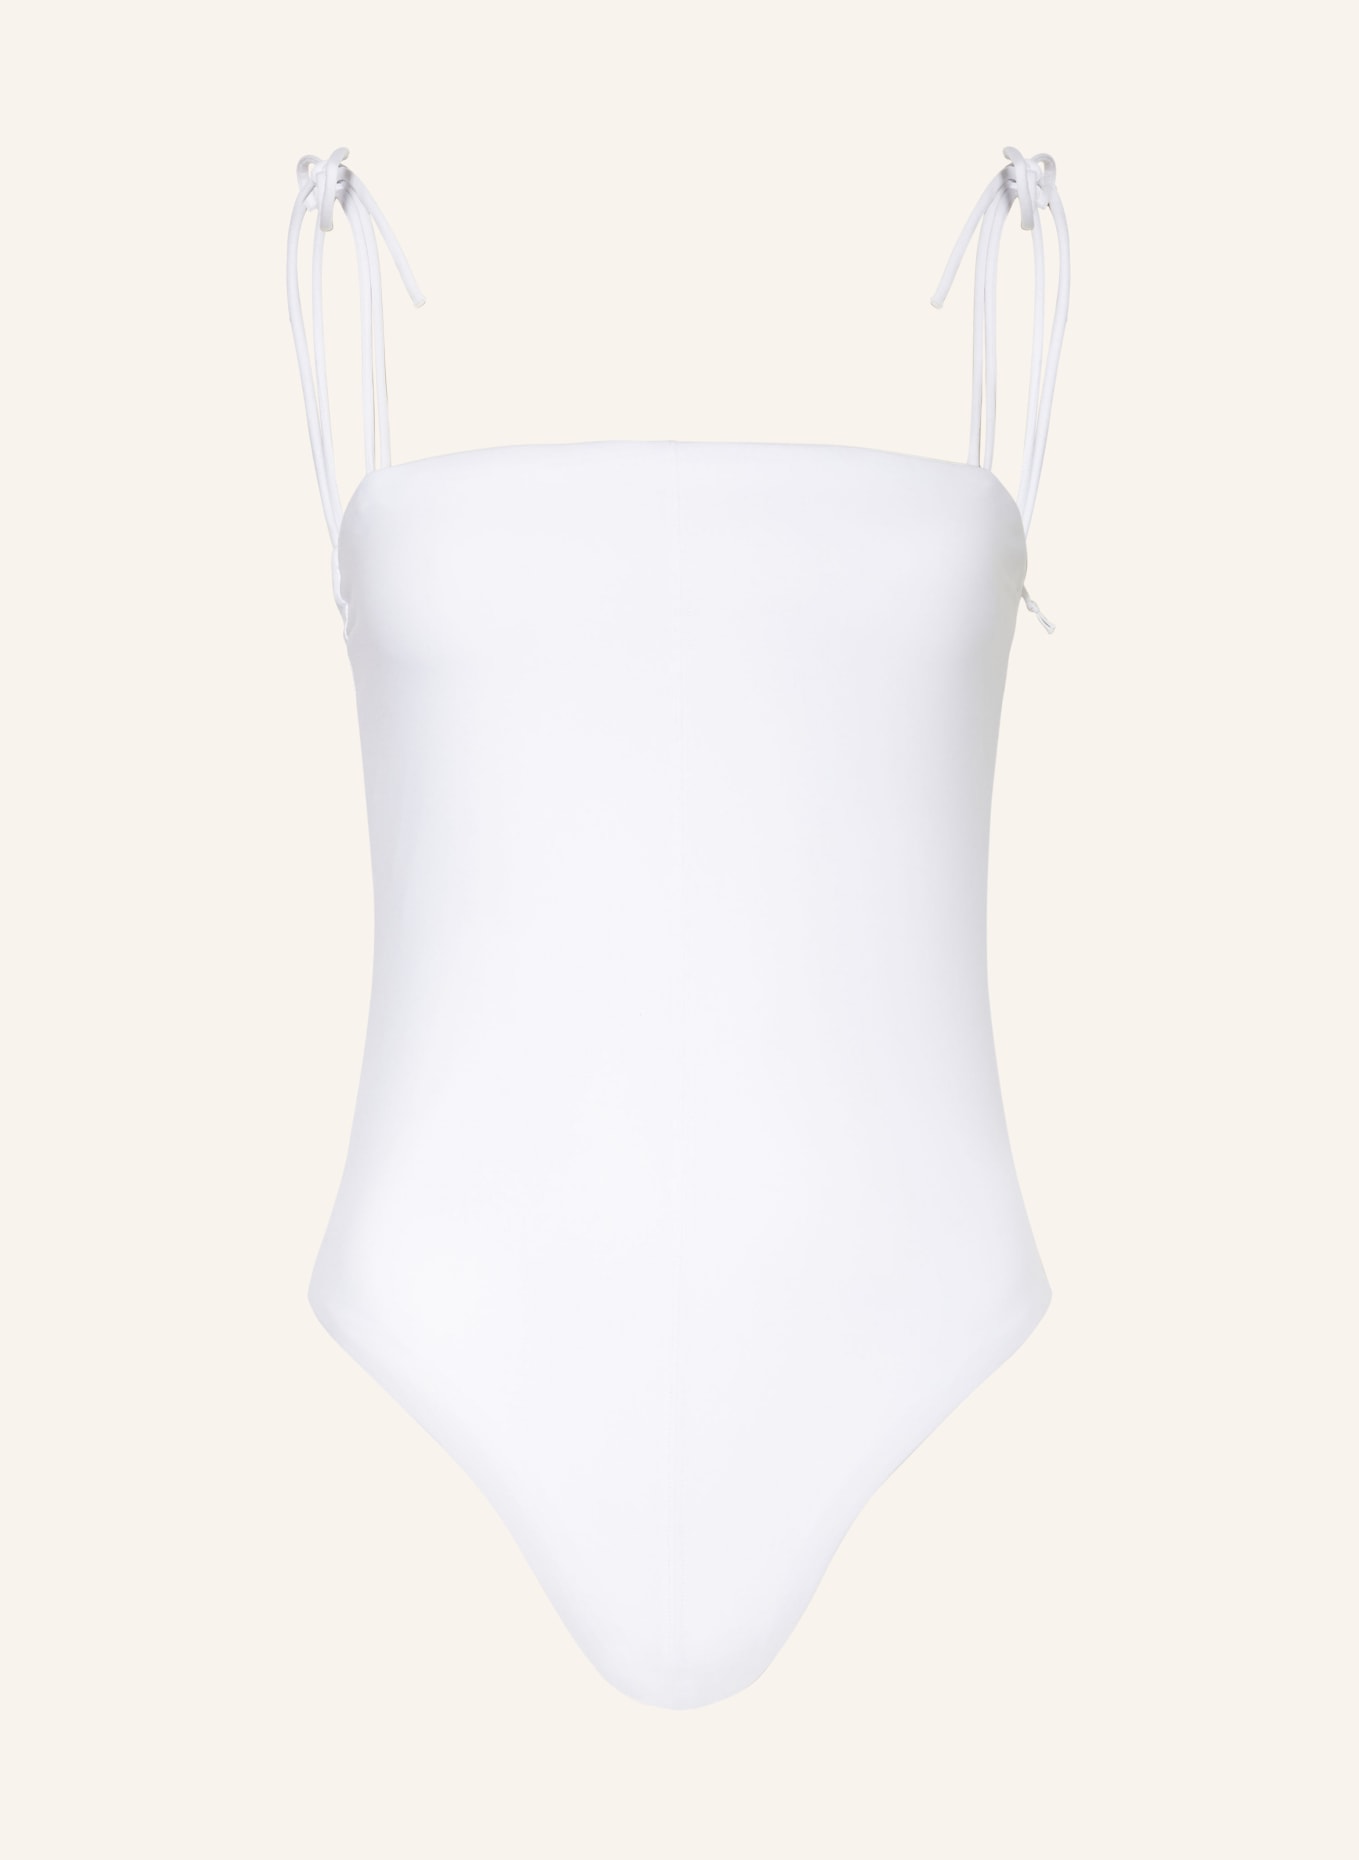 VIKTORIA LOUISE Swimsuit THE HOURGLASS, Color: WHITE (Image 1)